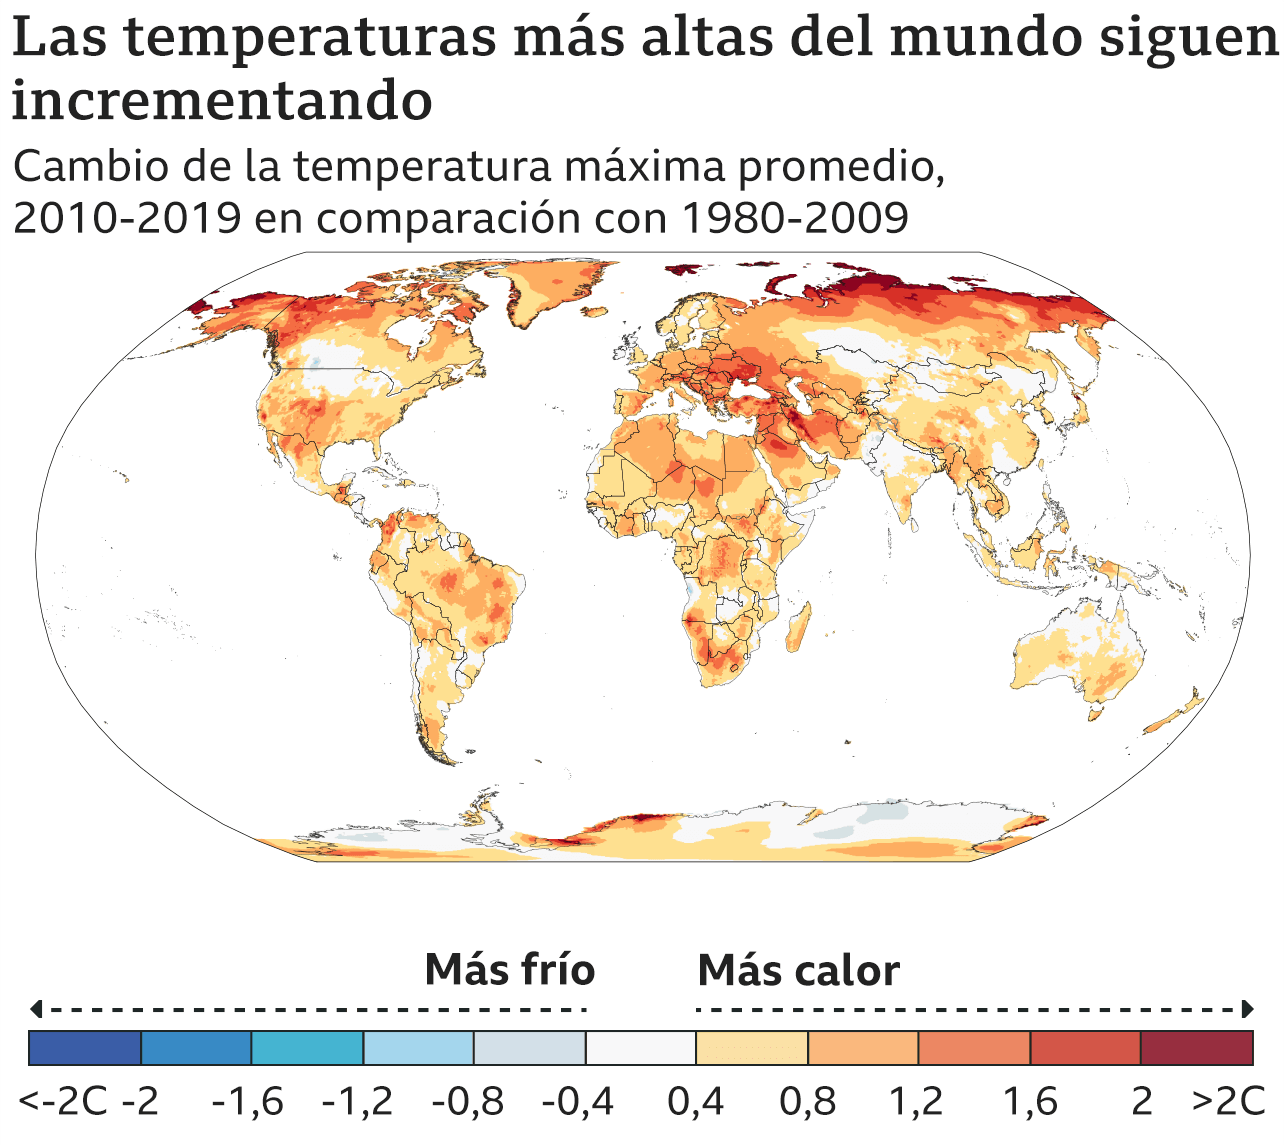 There are more and more days of extreme heat, and the whole planet is warming up.